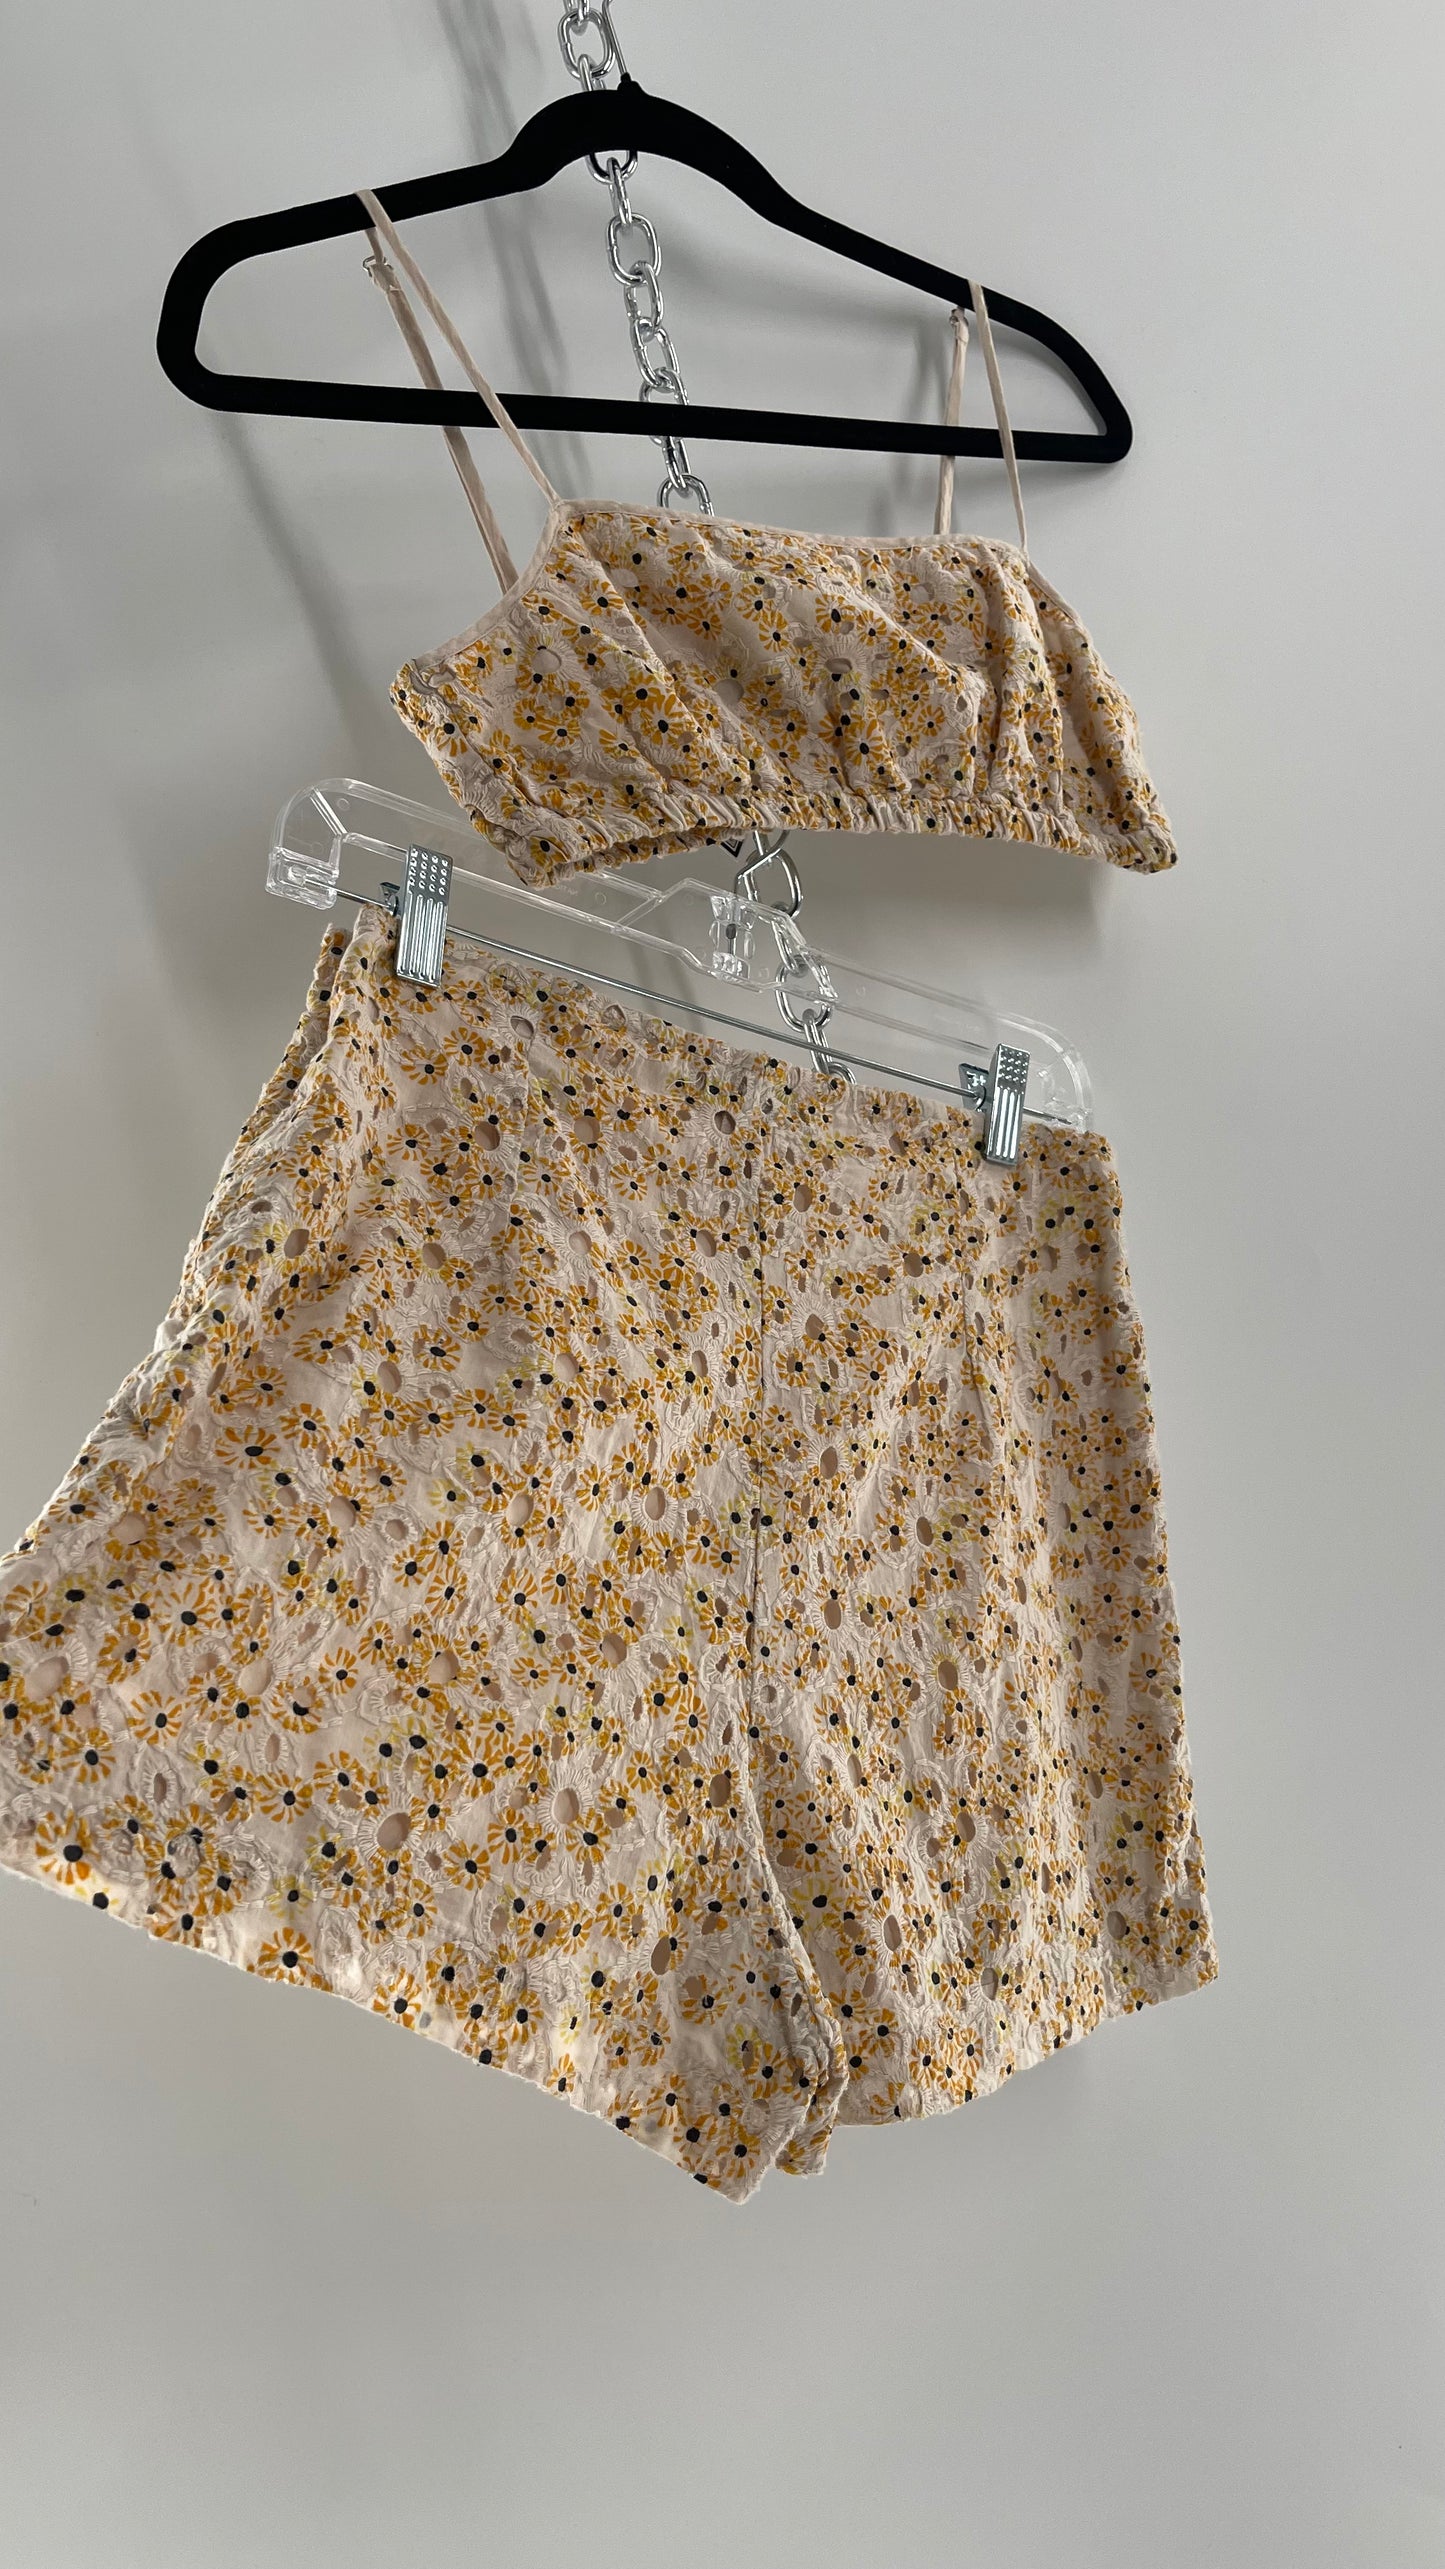 Urban Outfitters Eyelet Lace Daisy Print 2pc Shorts and Bustier Tank Set (Small Top Medium Bottoms)